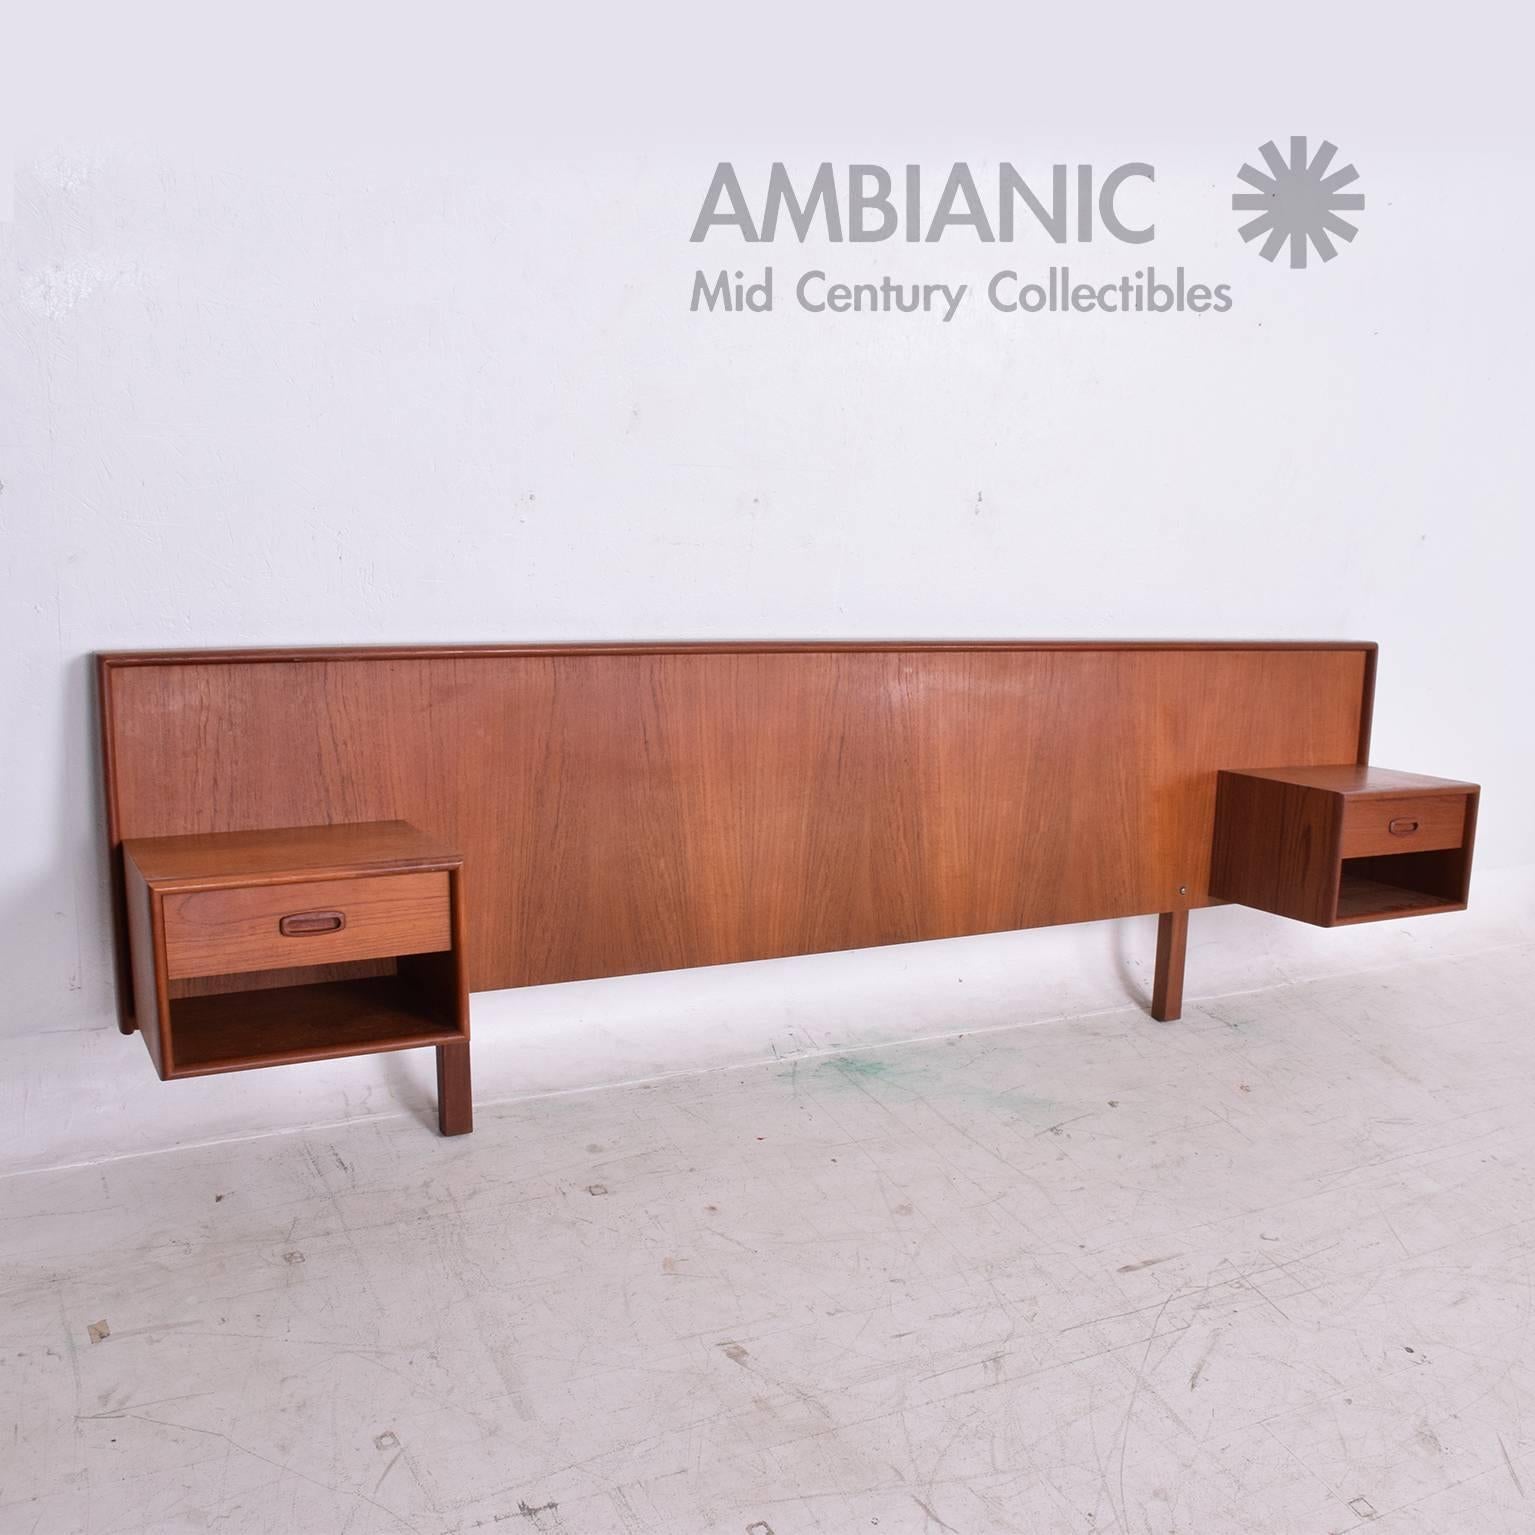 For your consideration a vintage headboard made in Denmark. 

Includes sculptural floating nightstands.

Dimensions: 30 1/2" tall x 97" L.
Will fit a queen size mattress, clearance 64". 

